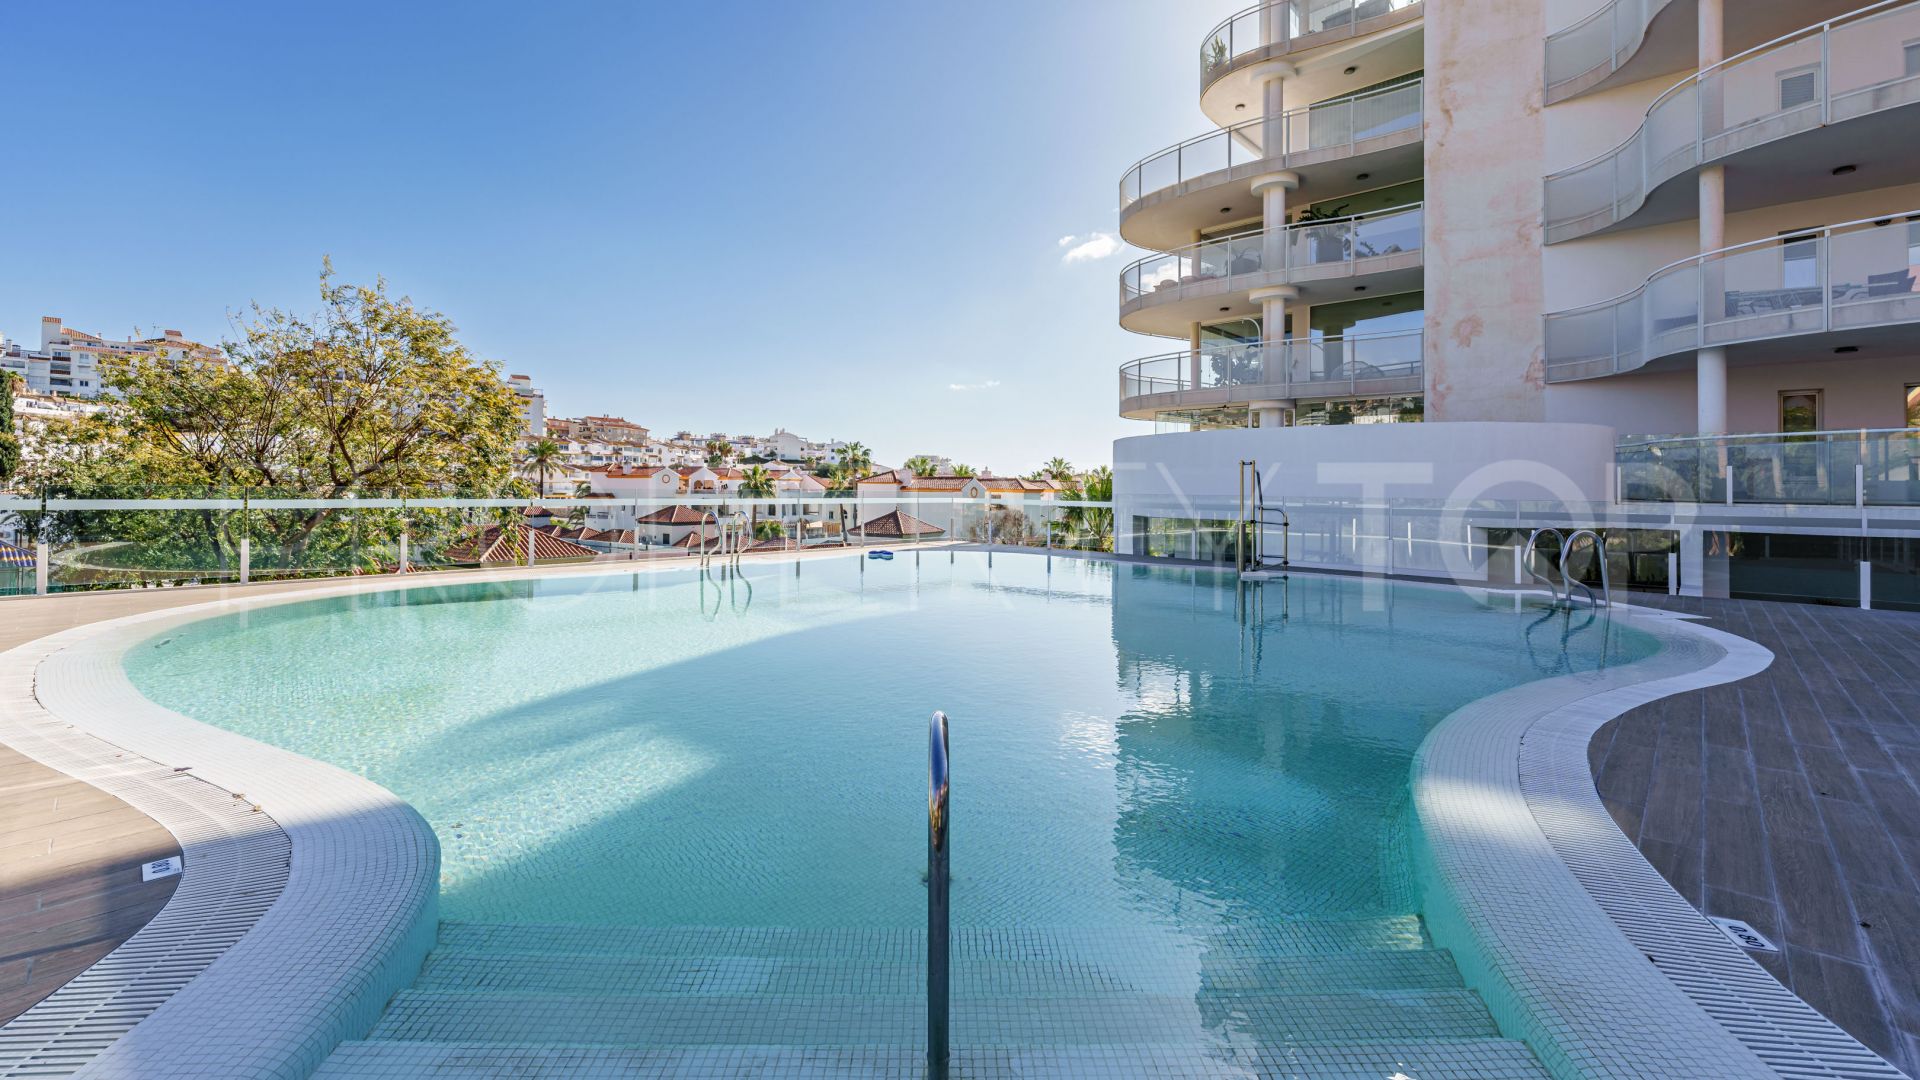 For sale Benalmadena duplex penthouse with 3 bedrooms